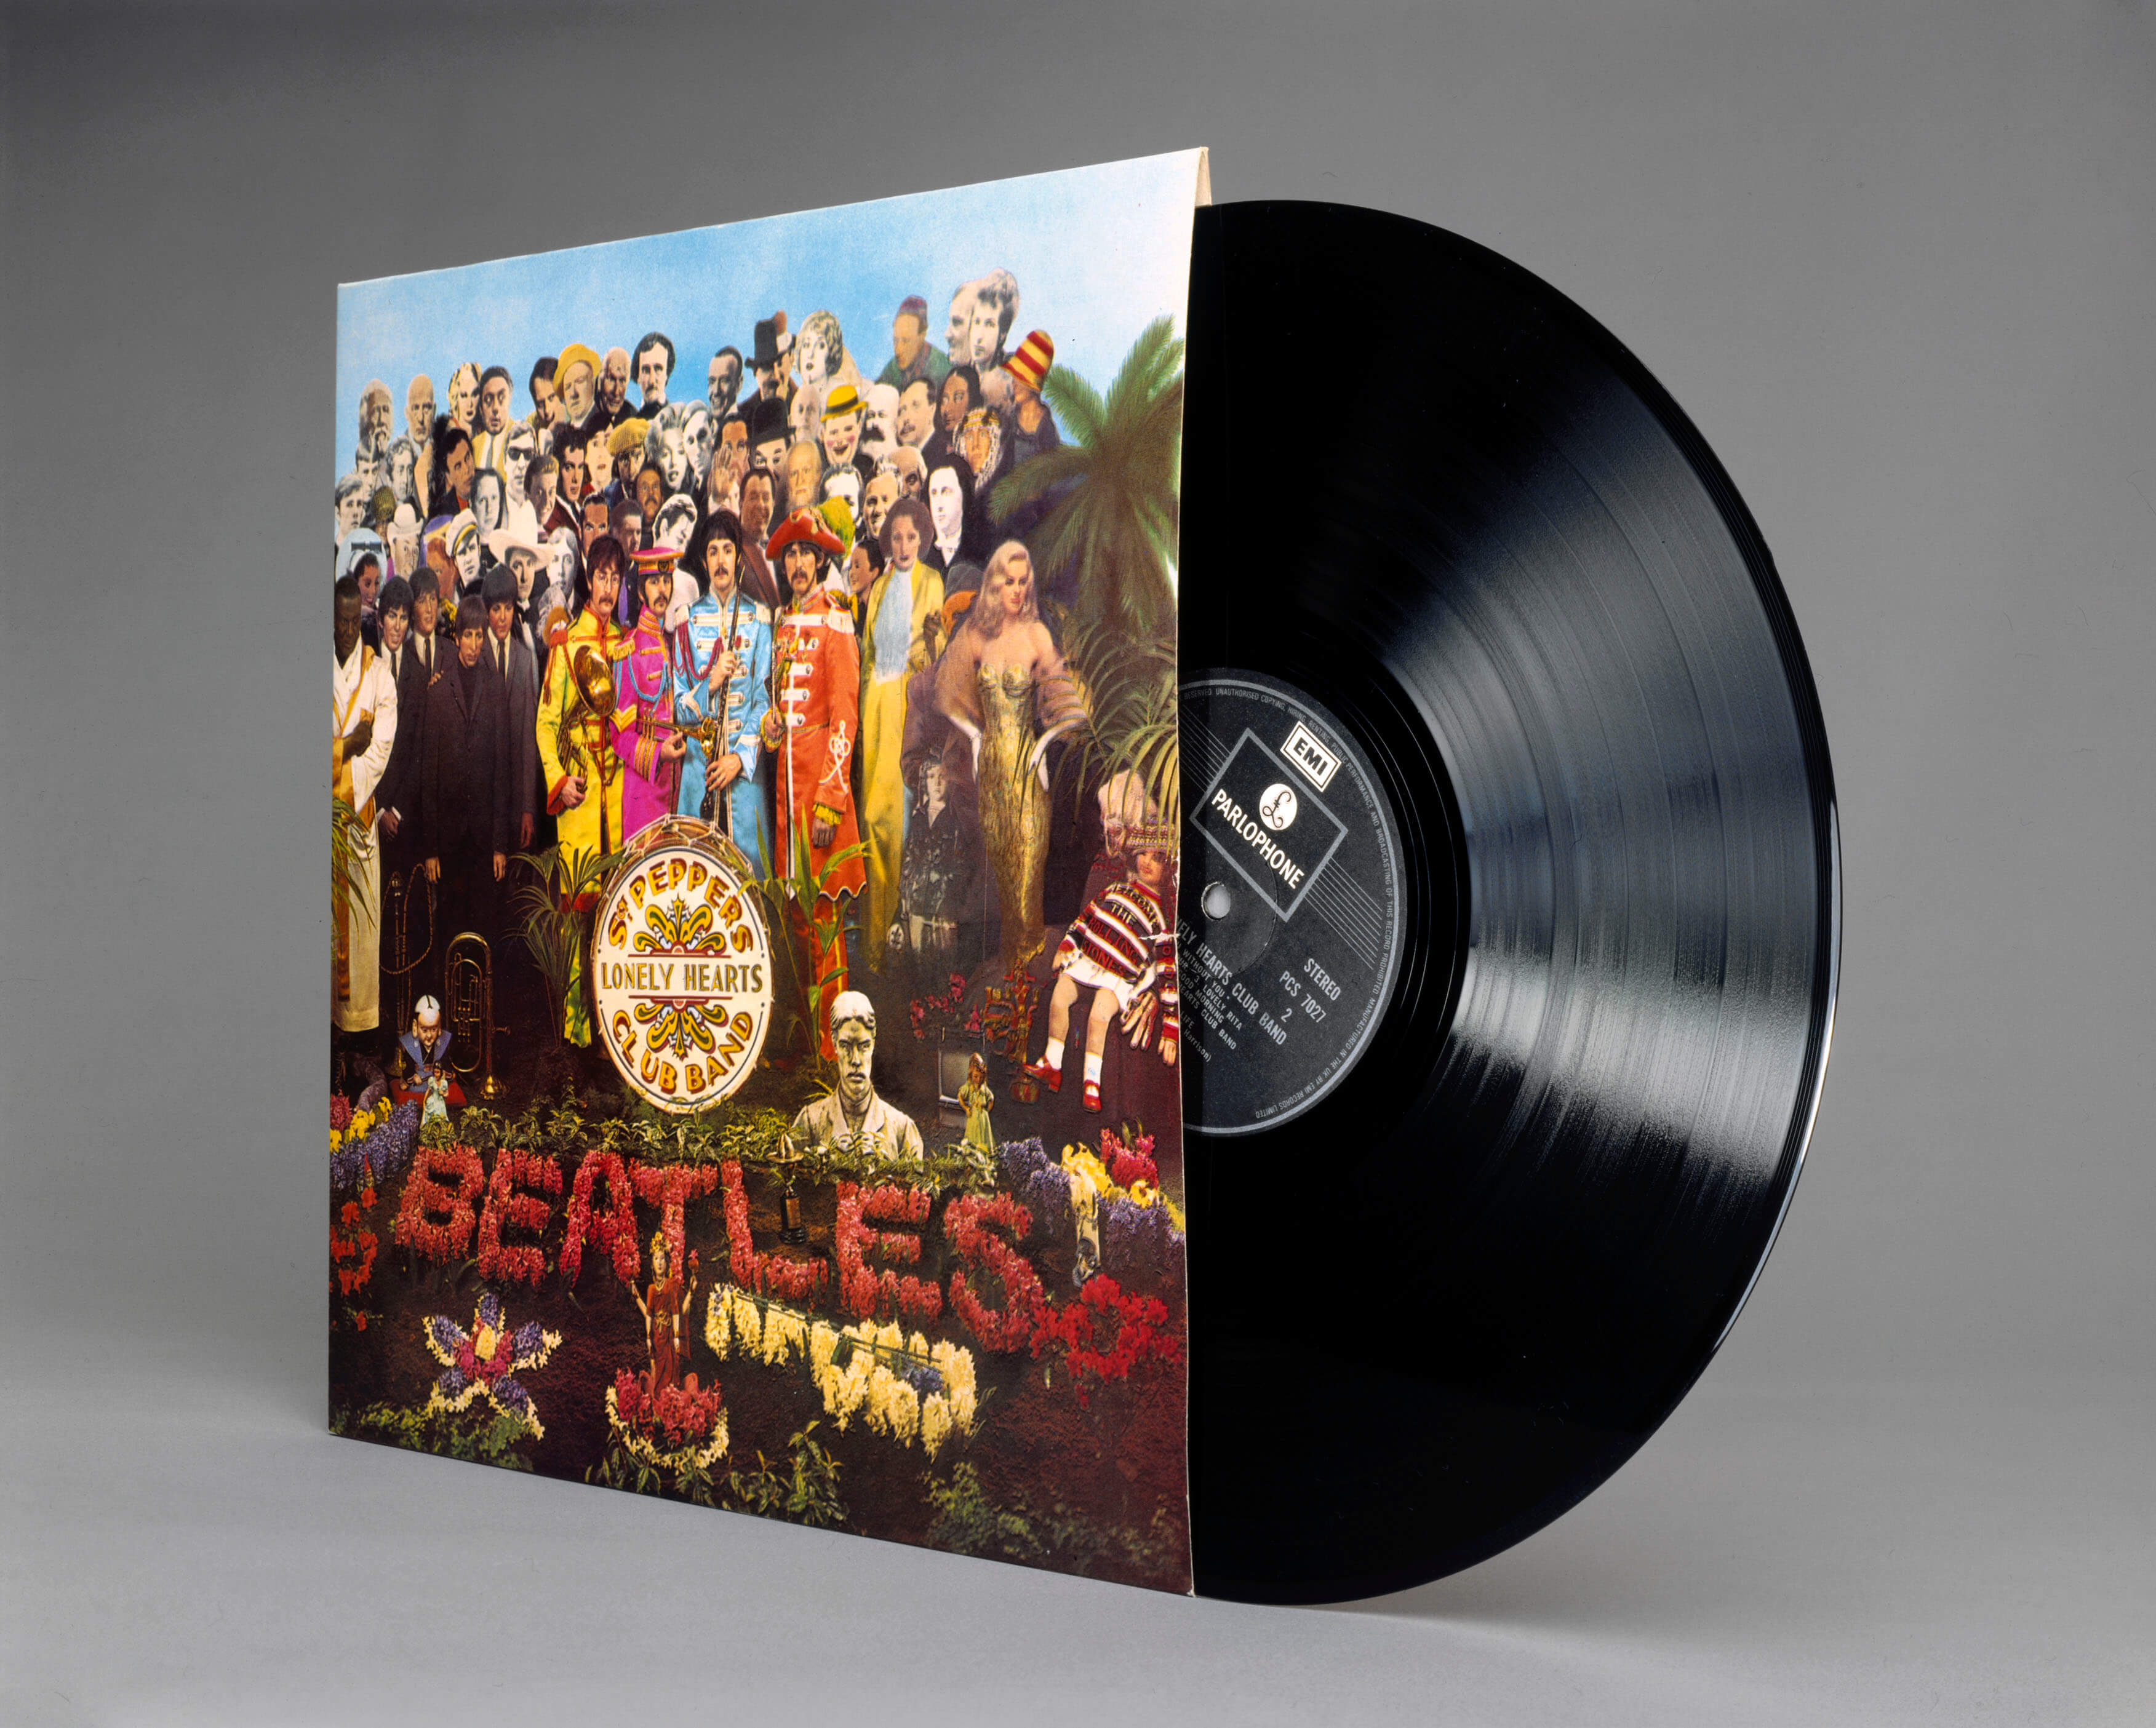 A vinyl of The Beatles' Sgt. Pepper's Lonely Hearts Club Band'